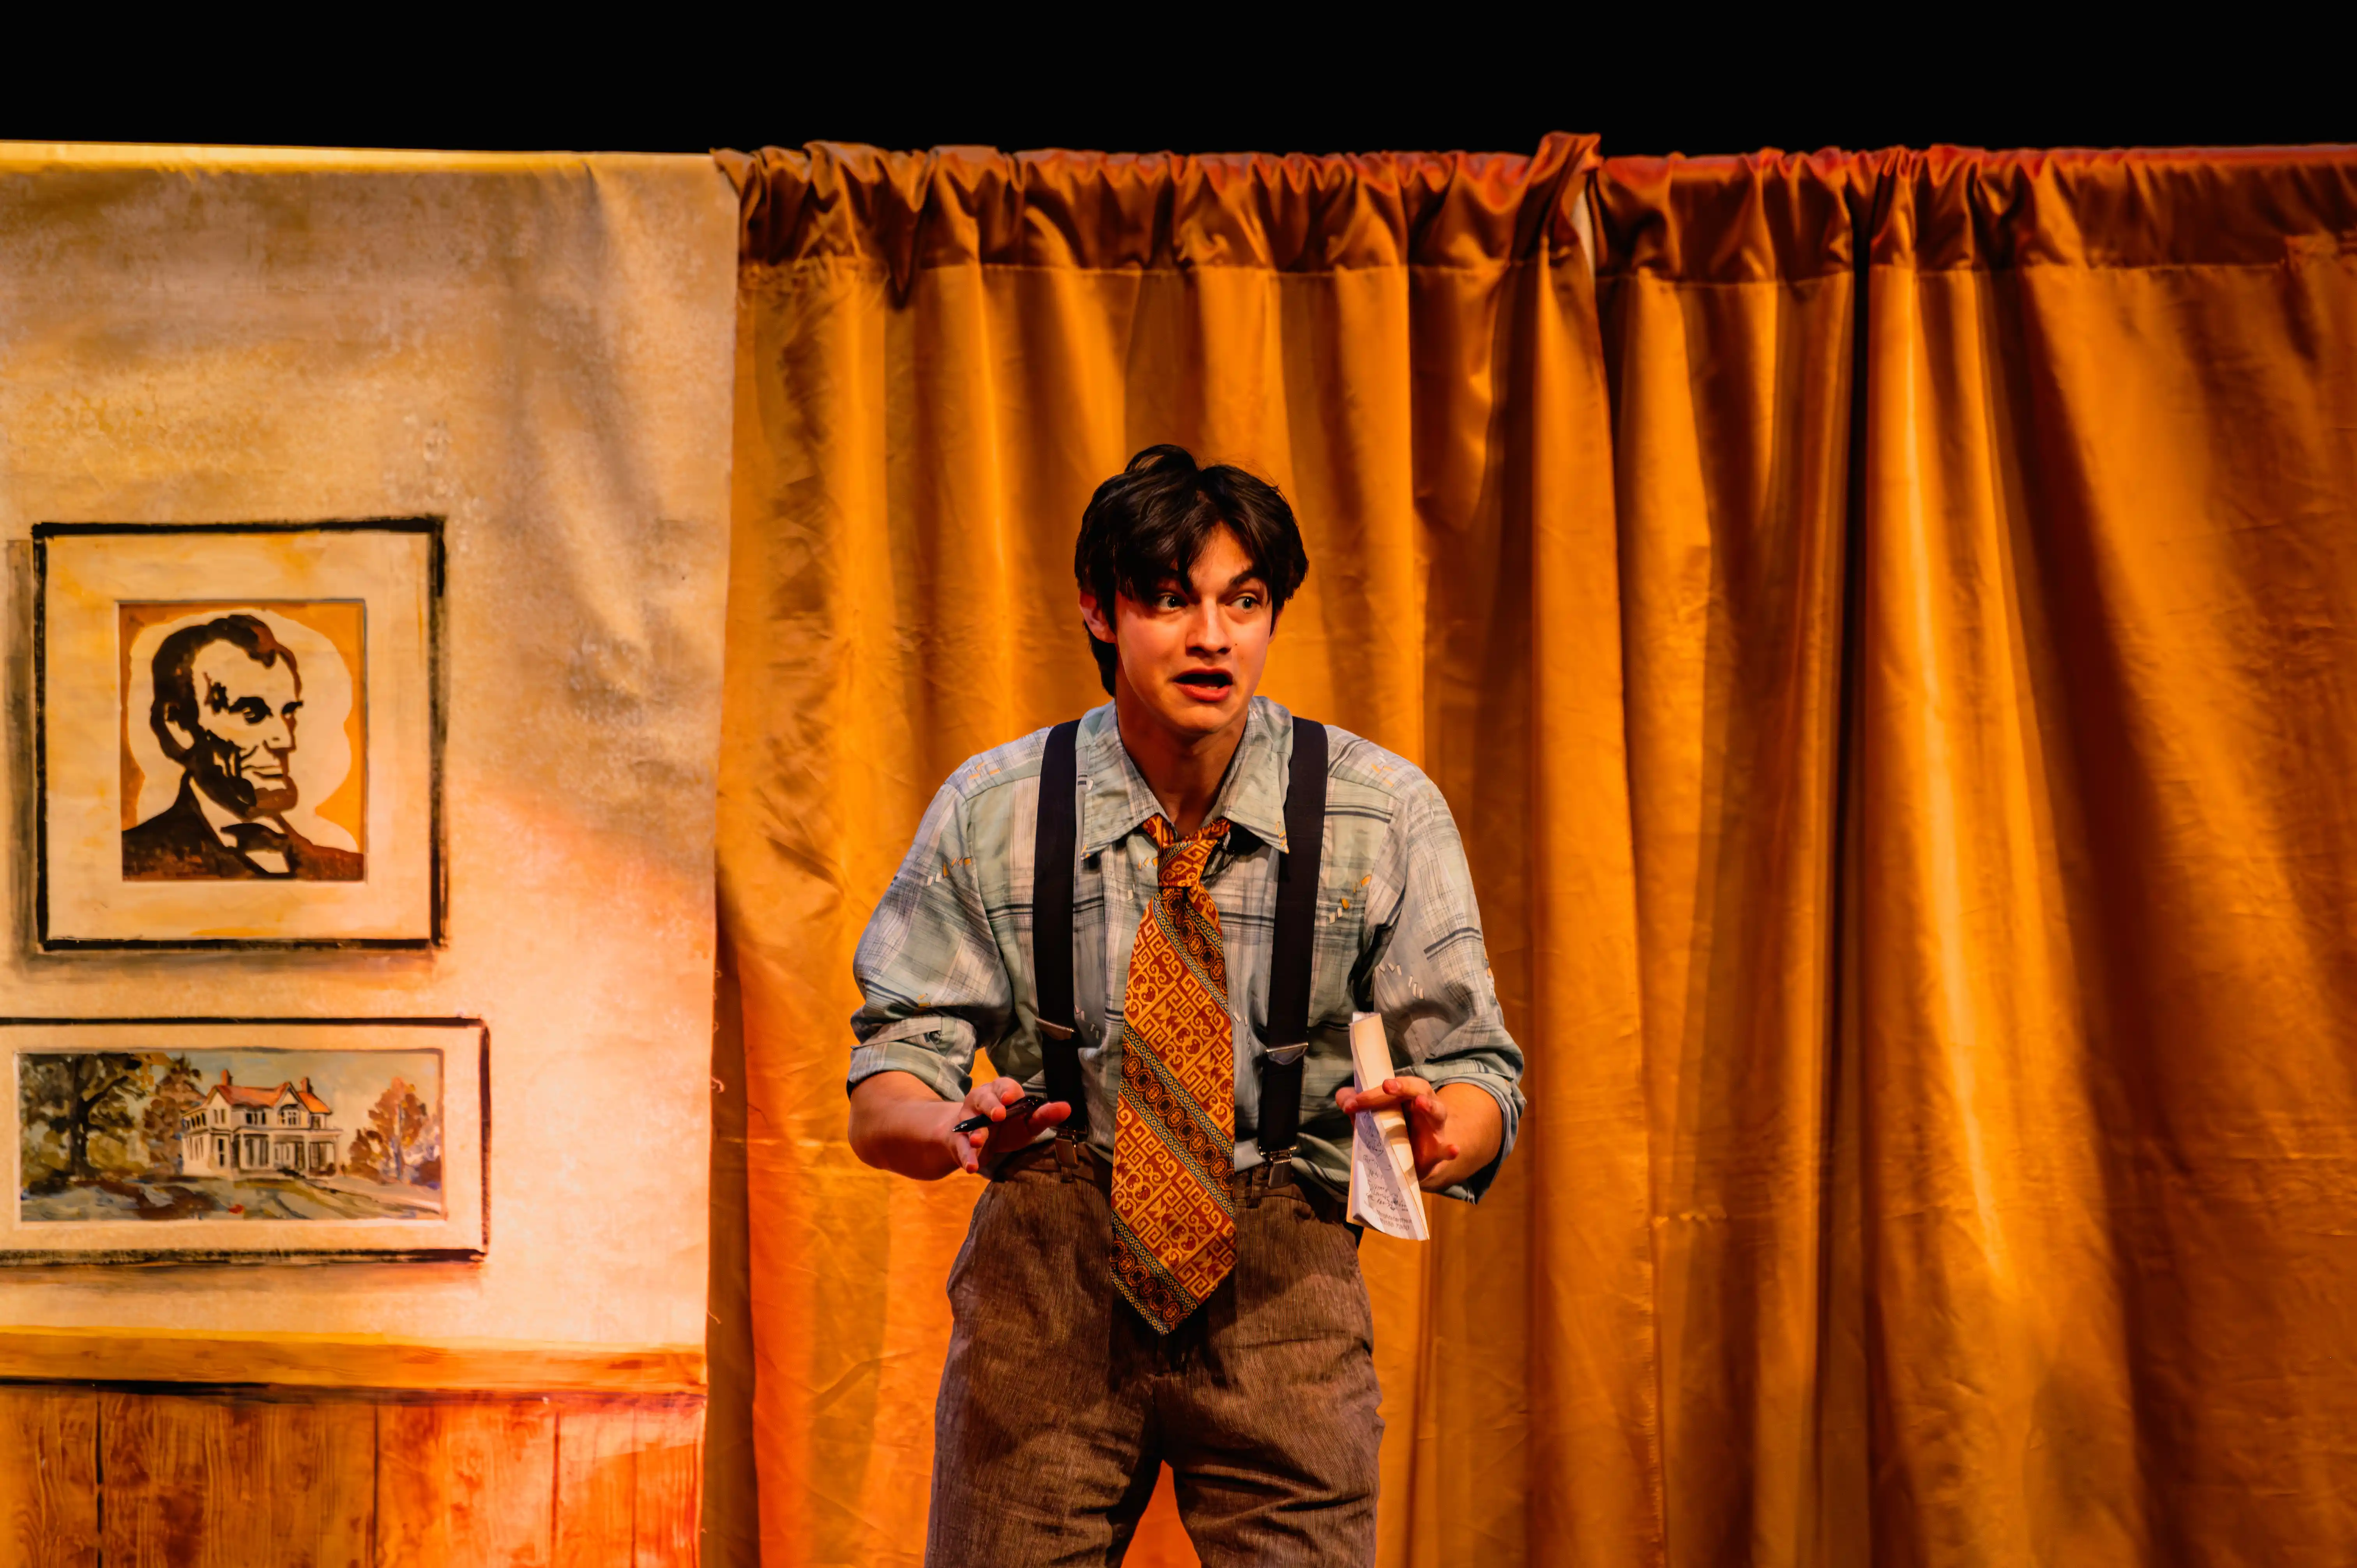 Actor on stage performing with a surprised expression, in front of a yellow curtain with pictures and props in the background.